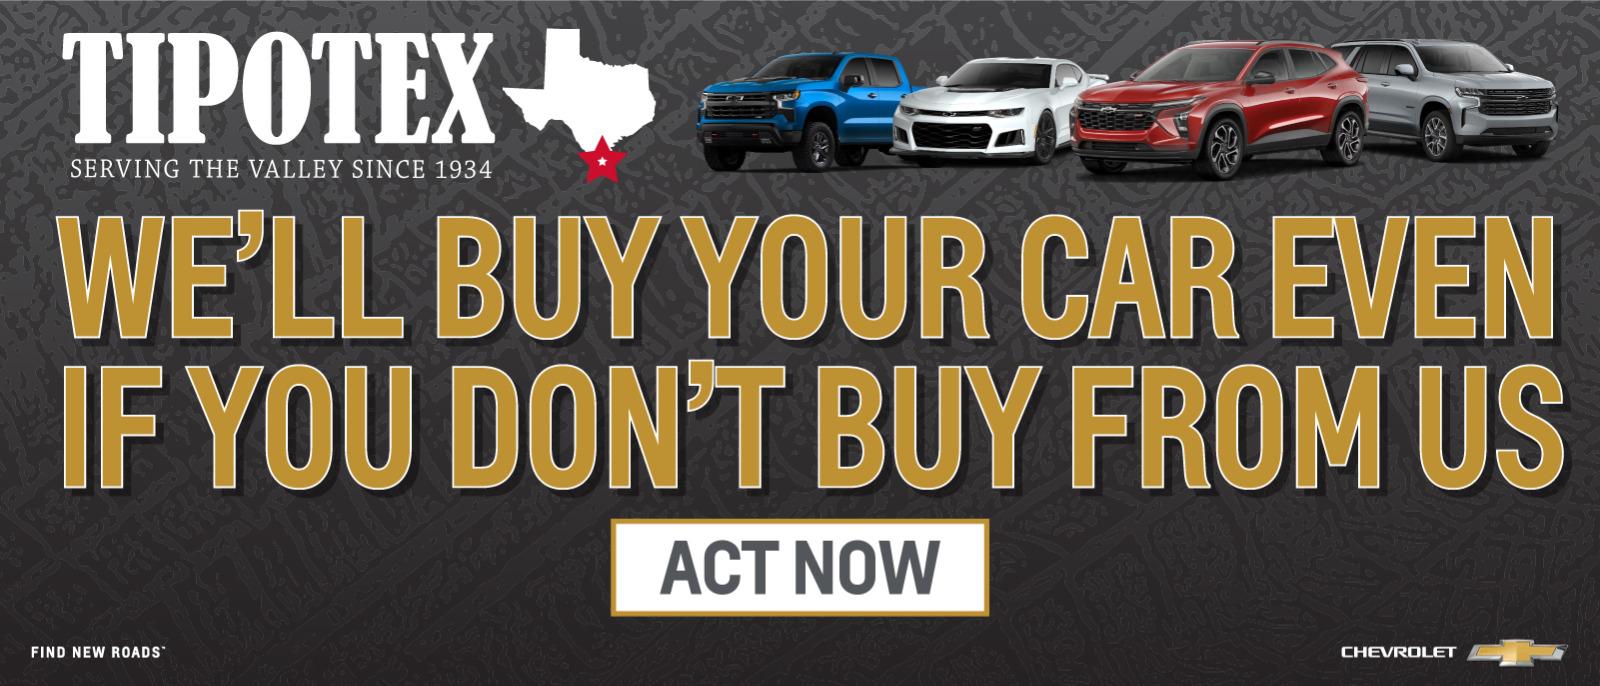 WE'LL BUY YOUR CAR EVEN IF YOU DON'T BUY FROM US